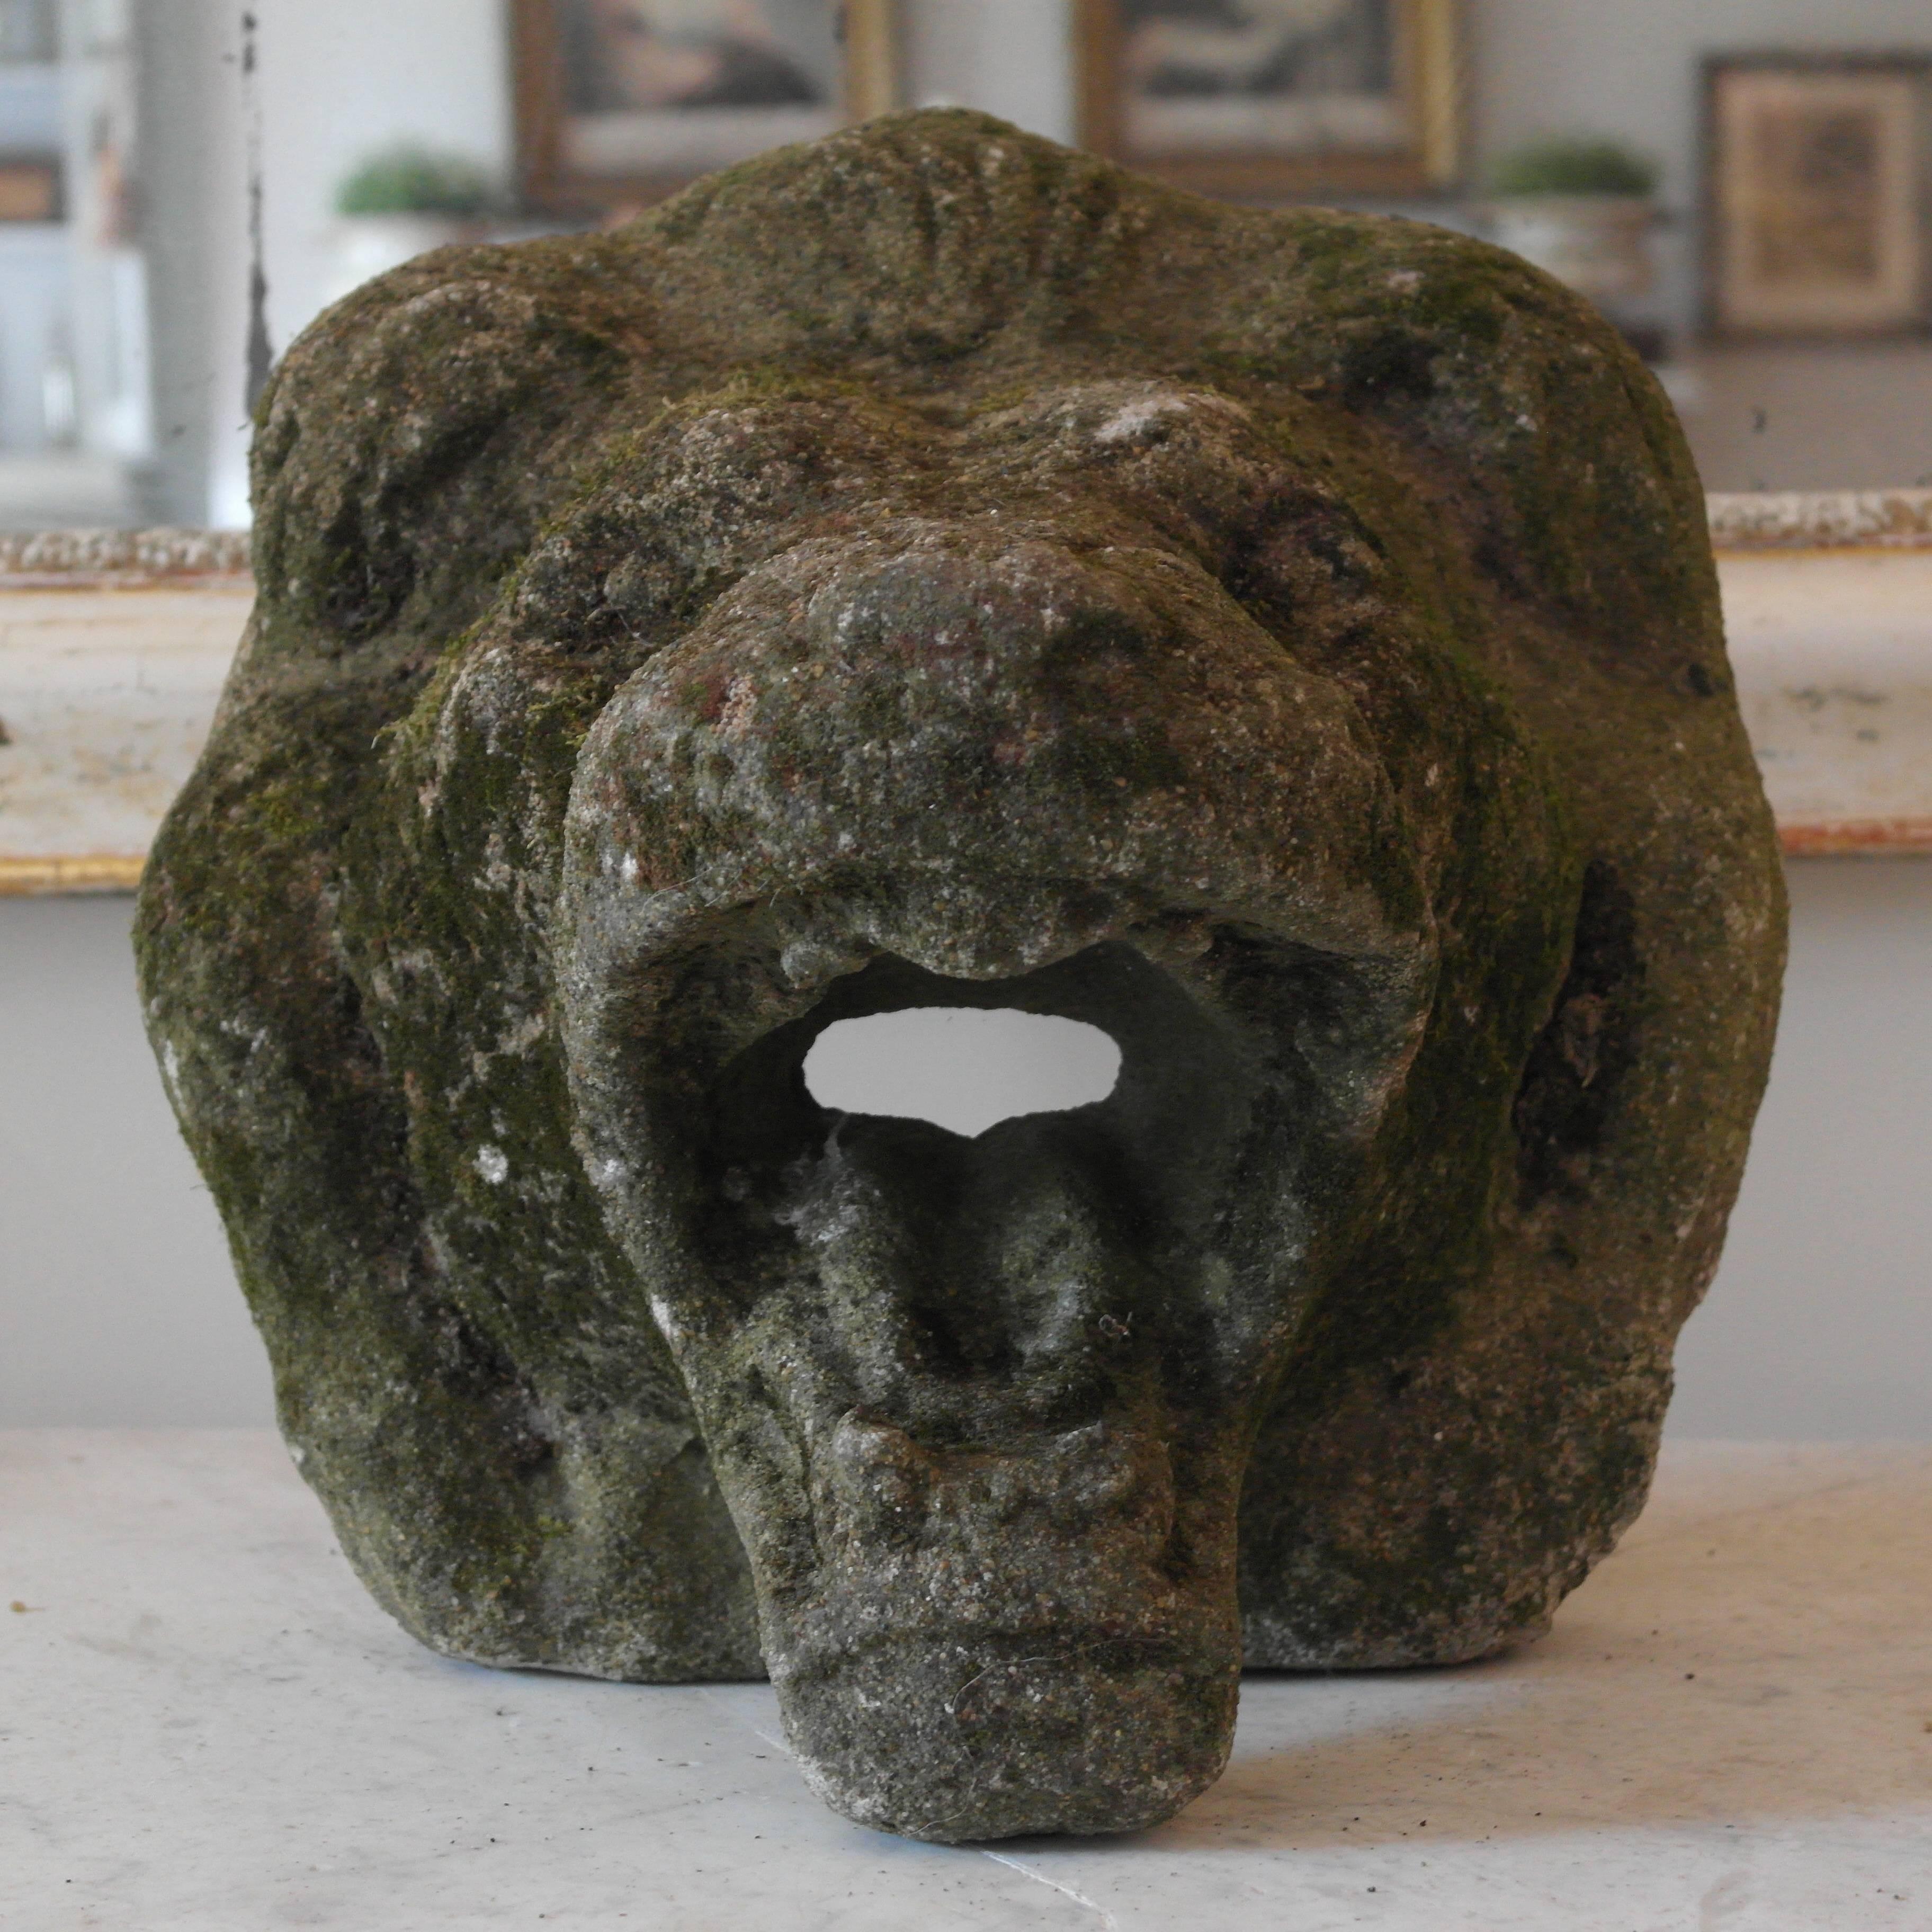 This fabulous and unusual lion’s head was originally designed as a water feature - ideally to put on a wall but because the large chin keeps it upright it could be placed as a decorative feature equally well - with good patination.